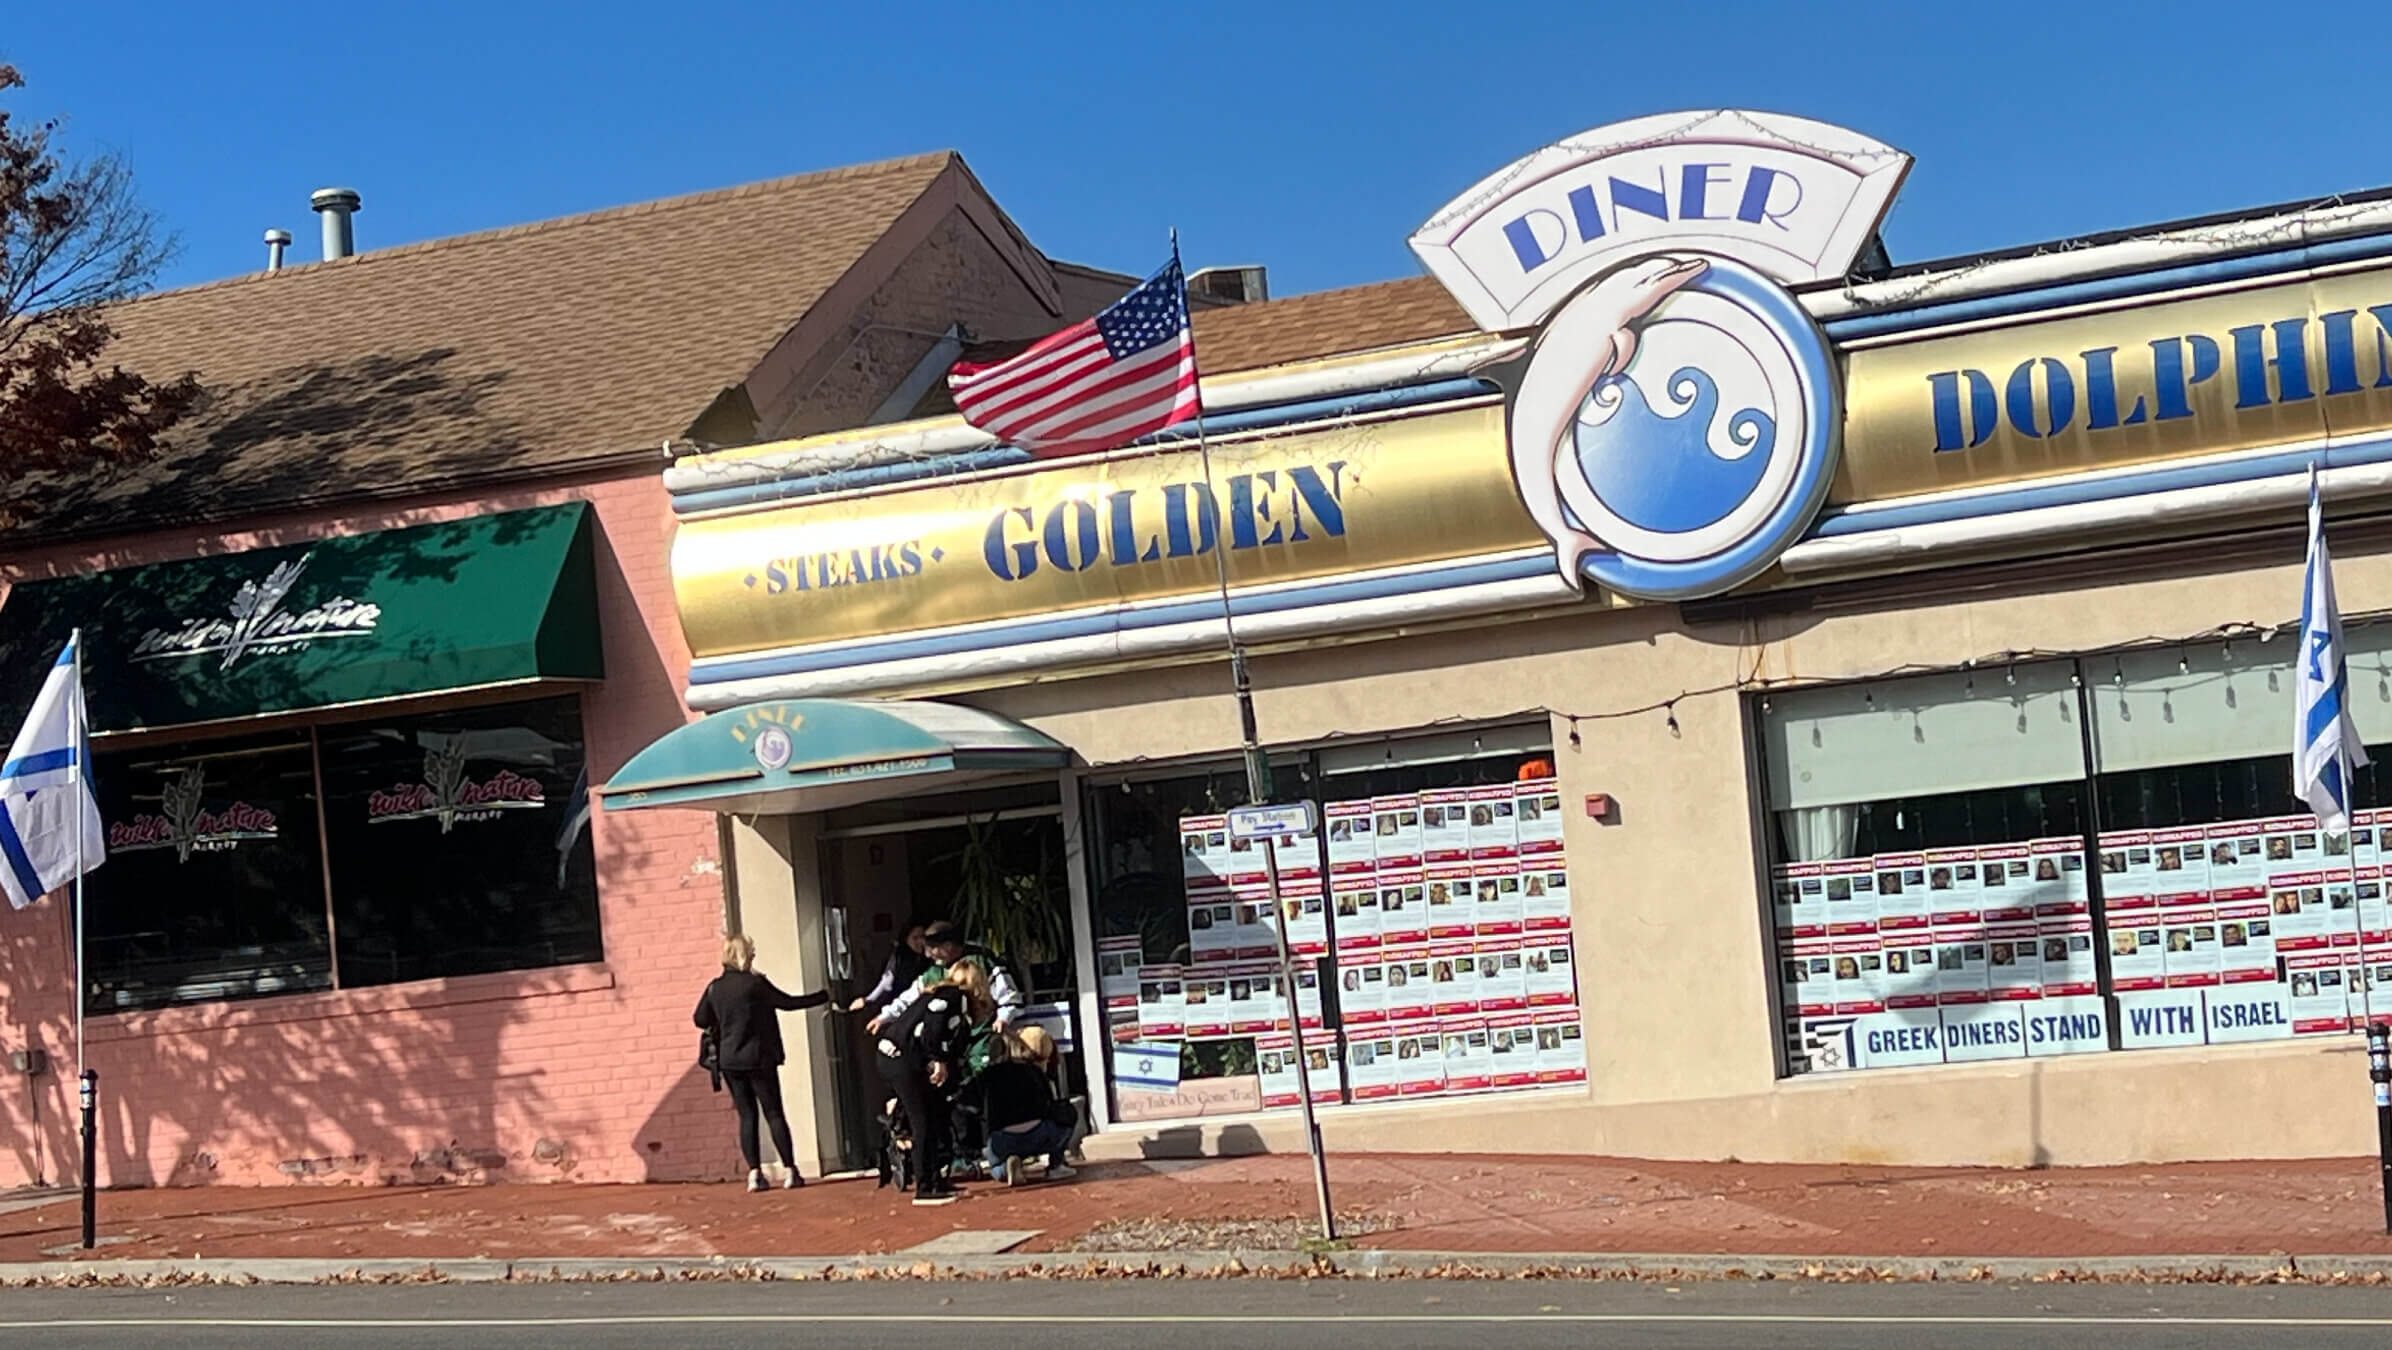 The Golden Dolphin diner in Huntington, New York, on Oct. 31, 2023.